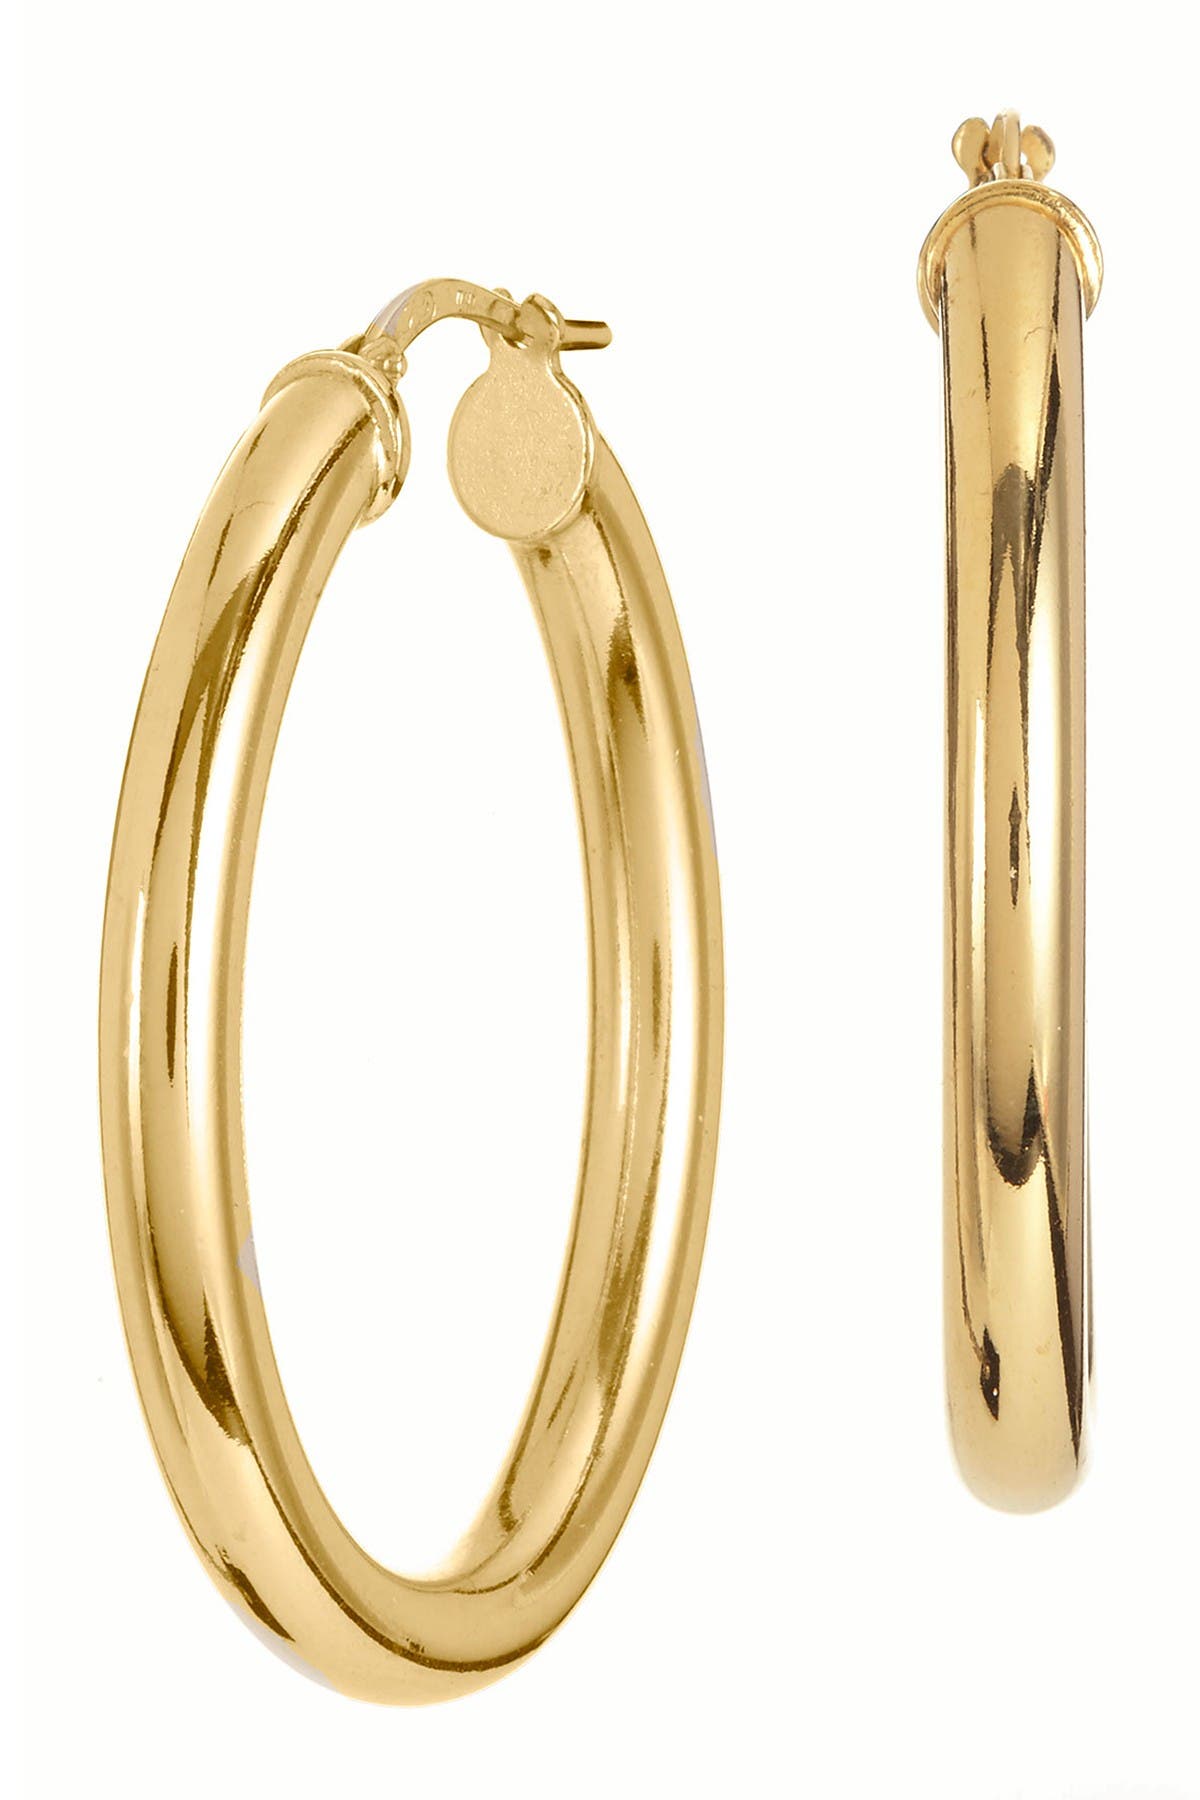 ALEX AND ELSA 18K Gold Plated 3 Color Oval Hoop Earrings 40mm #1 